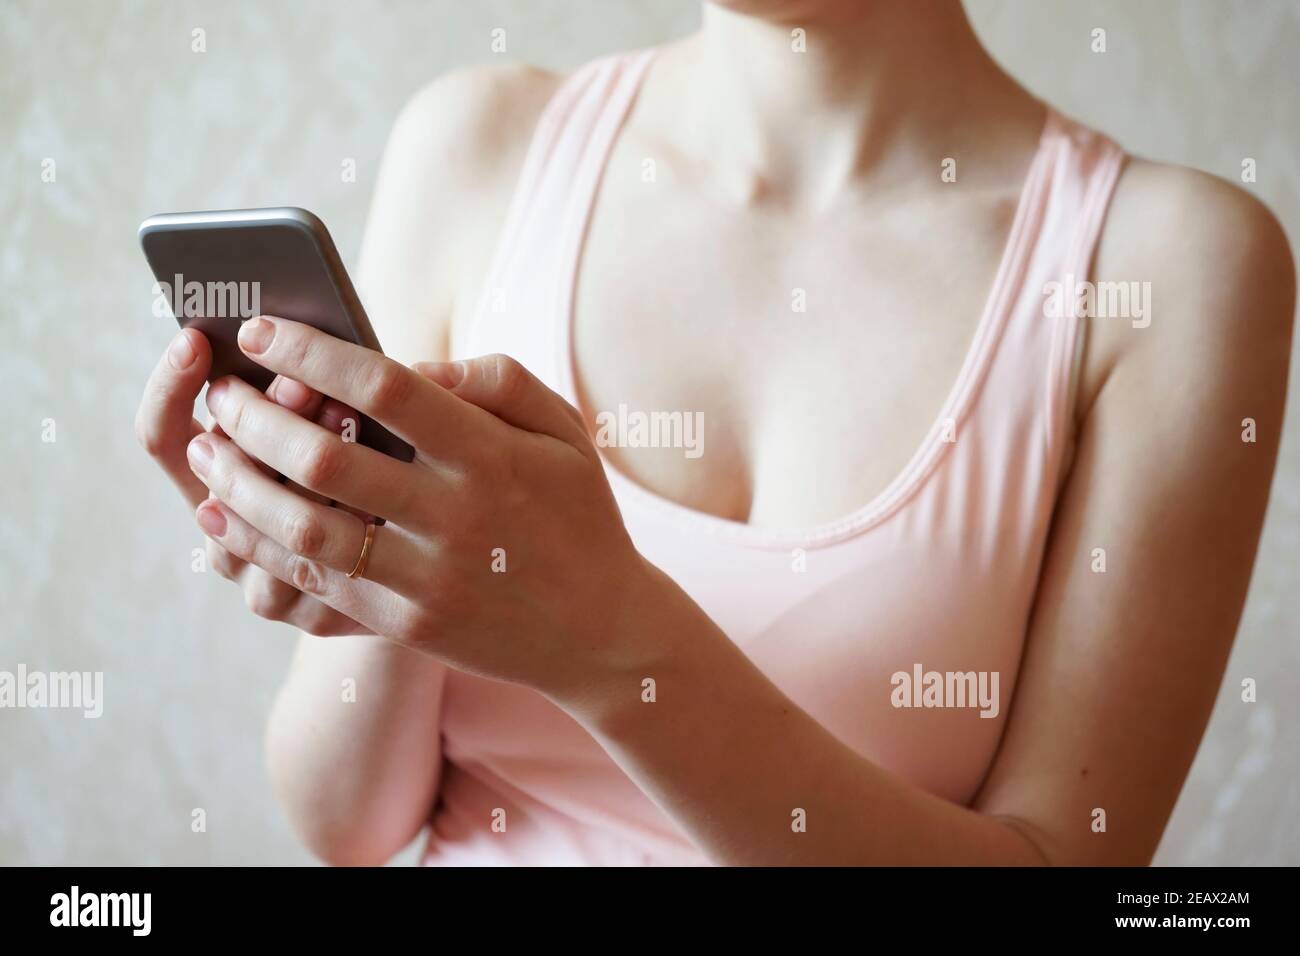 Close up of human body parts with gadgets Stock Photo